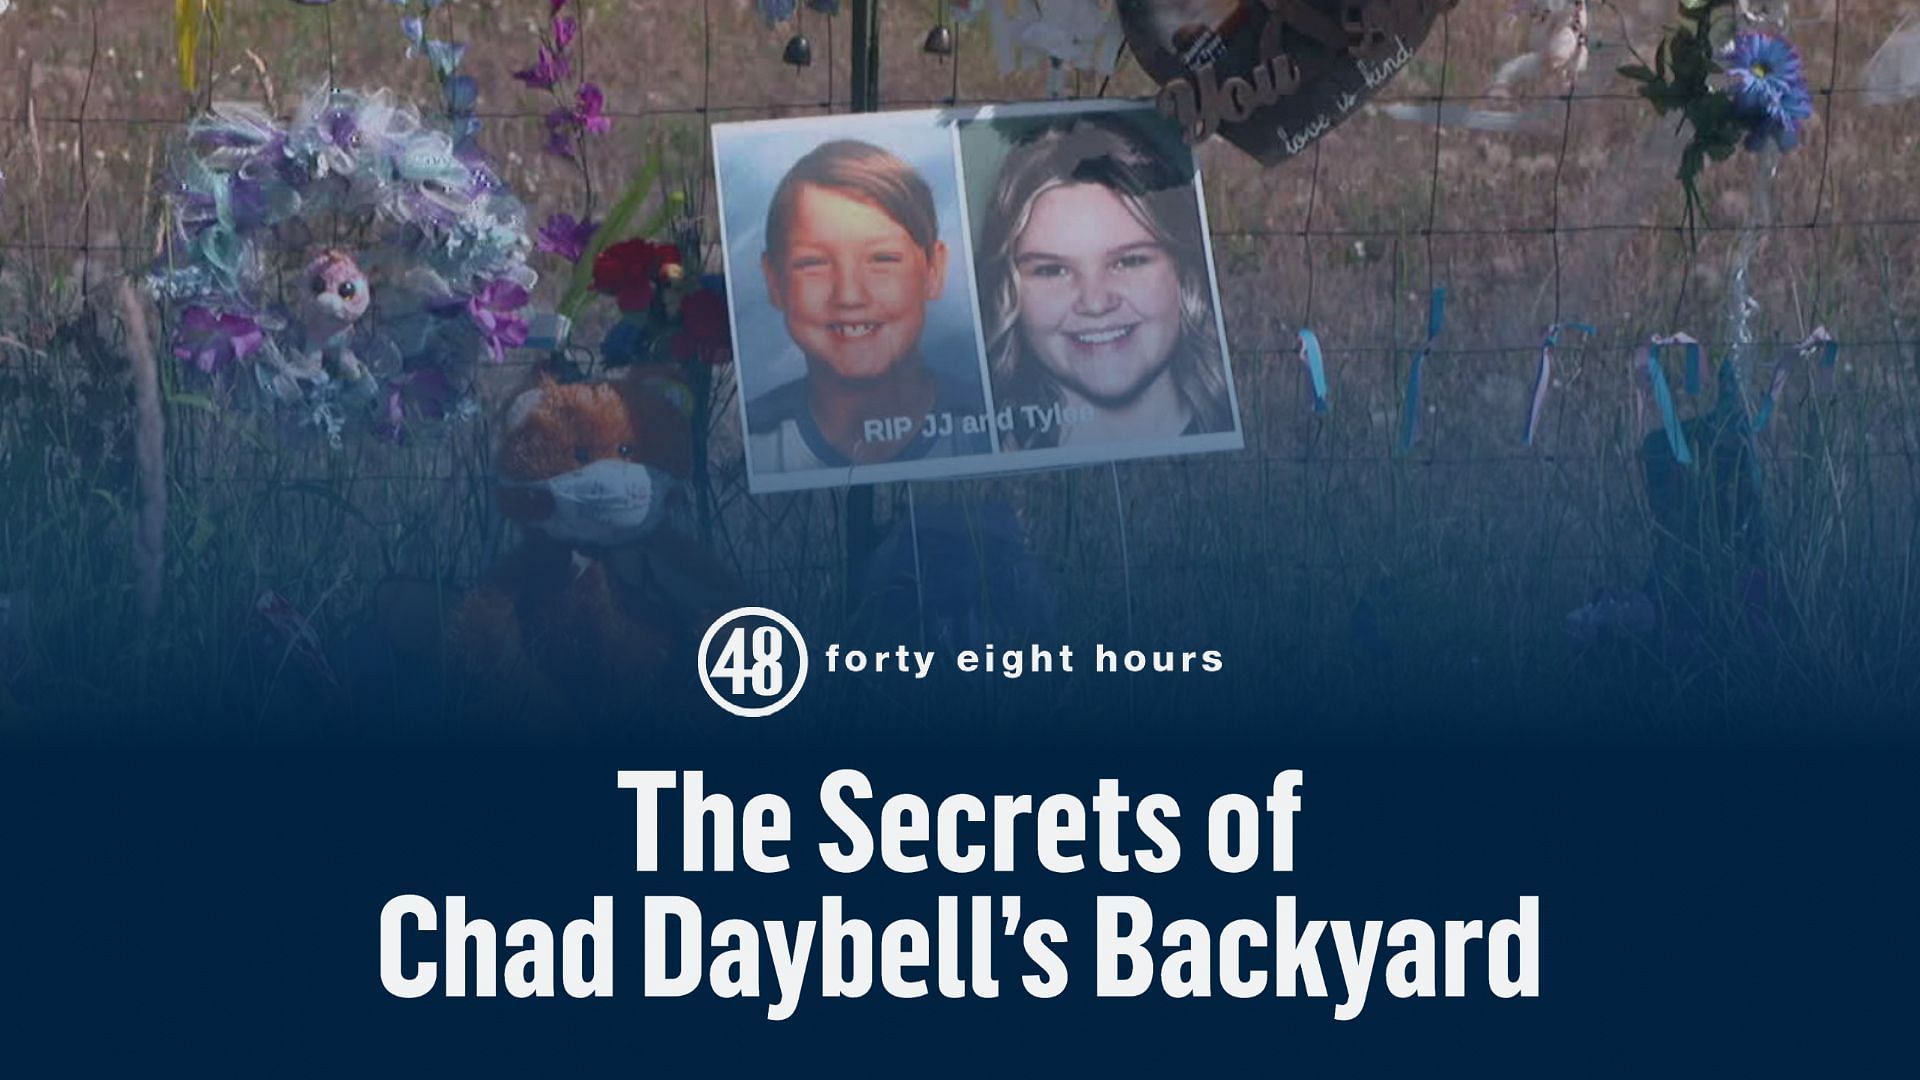 CBS&#039; 48 Hours is scheduled to revisit the murders of Lori Vallow&#039;s children, Tylee and JJ, on July 23, 2022 (Image via @48hours/Twitter)